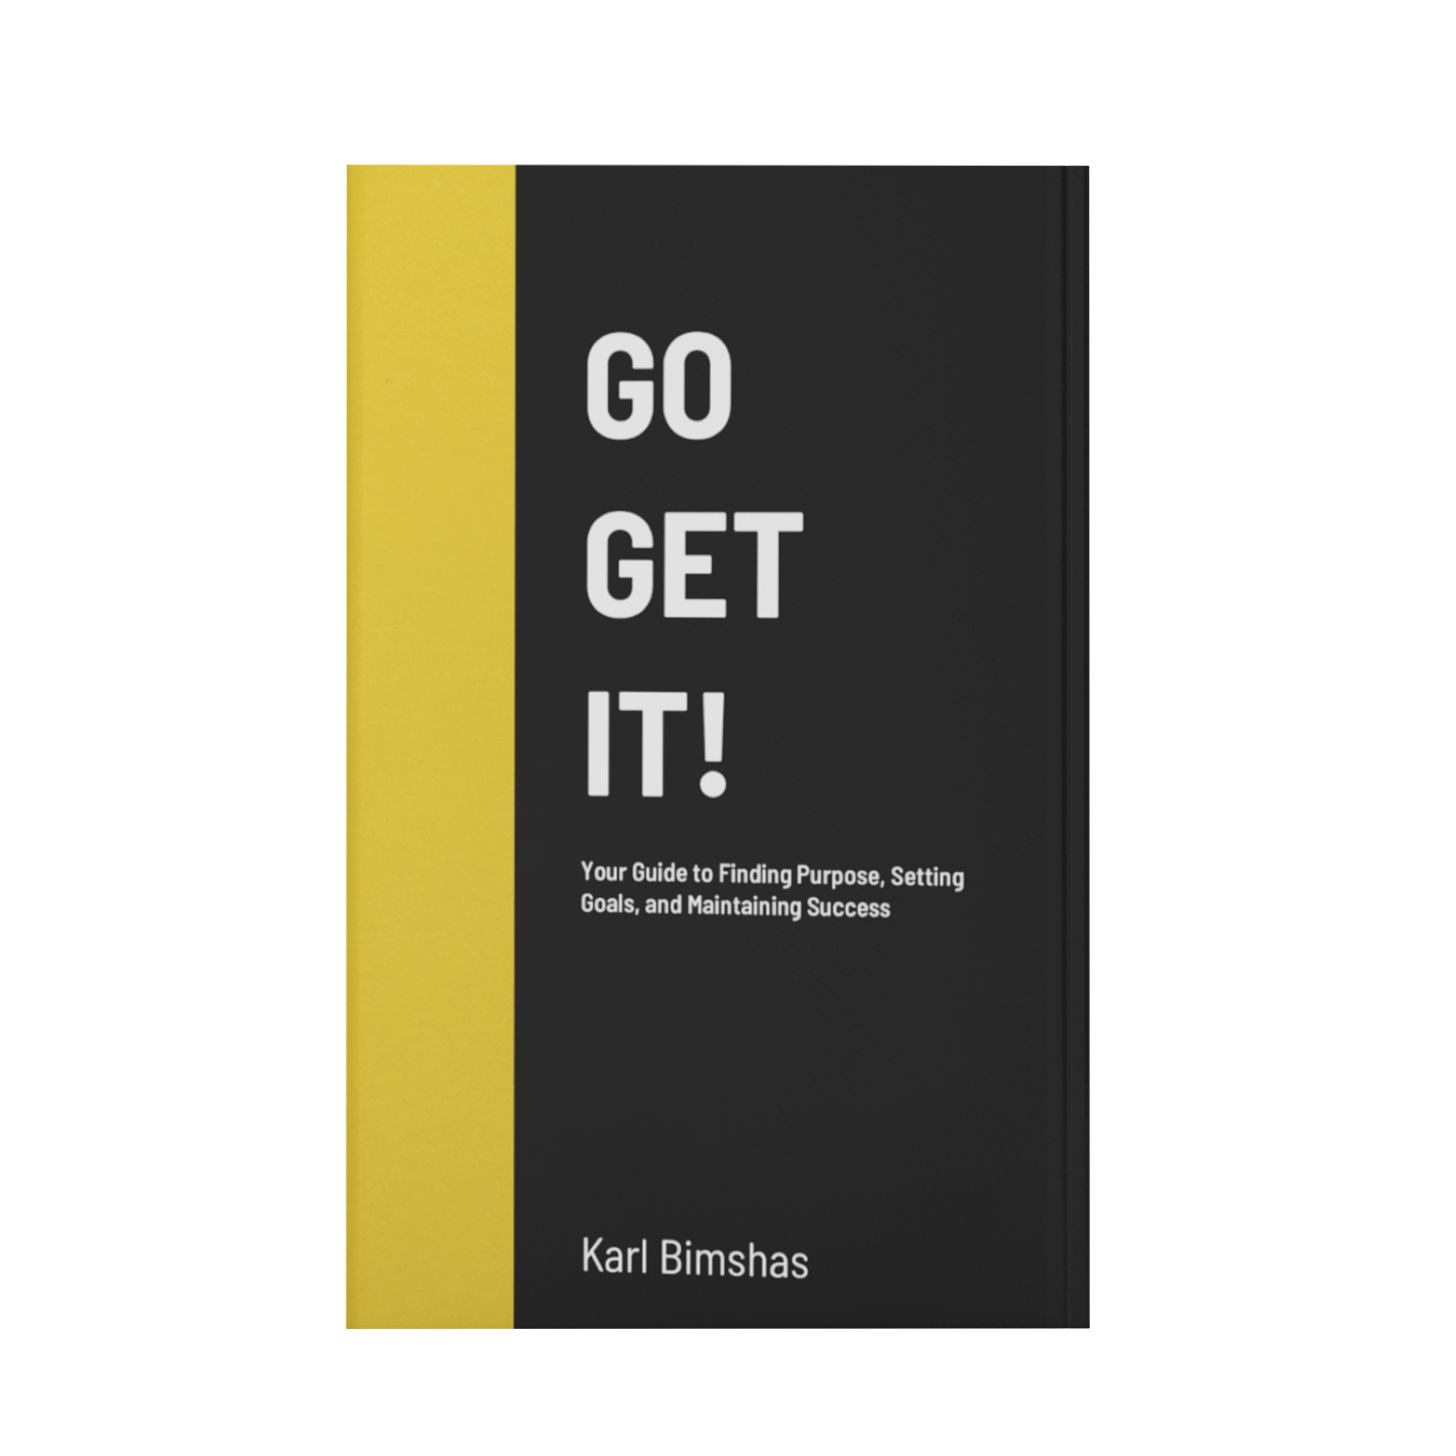 “GO GET IT! Your Guide to Finding Purpose, Setting Goals, and Maintaining Success” is available on LeadershirtsPlus.com